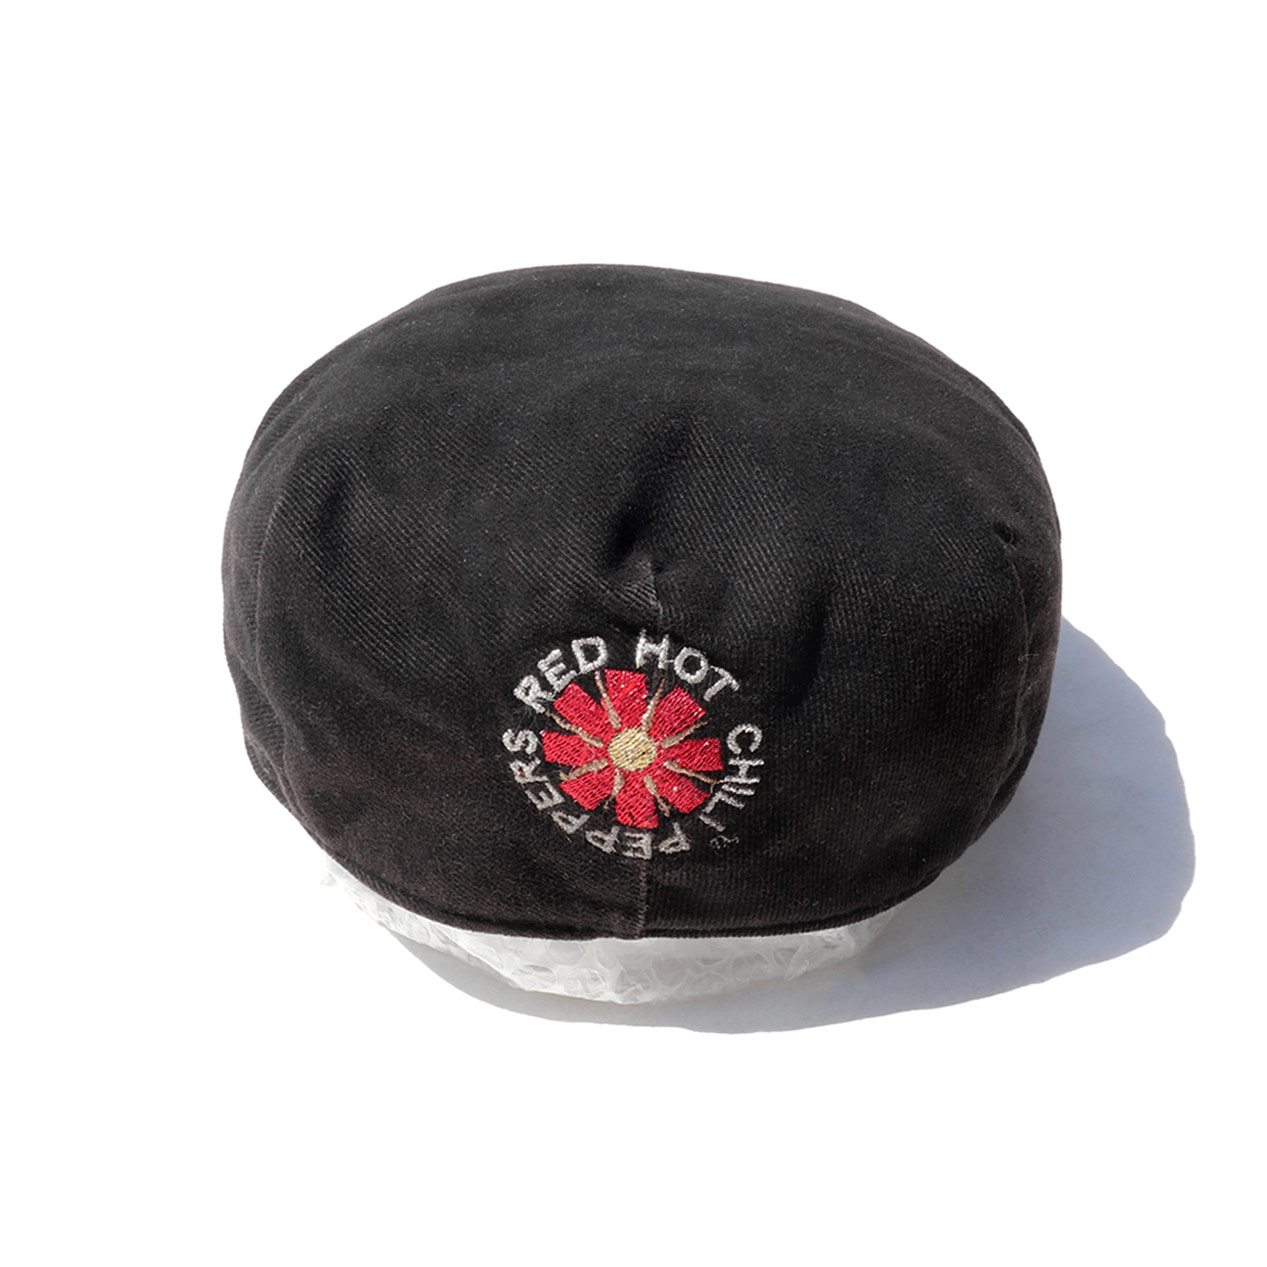 POST JUNK 90's～ RED HOT CHILI PEPPERS Embroidered Logo Flat Cap [About L]